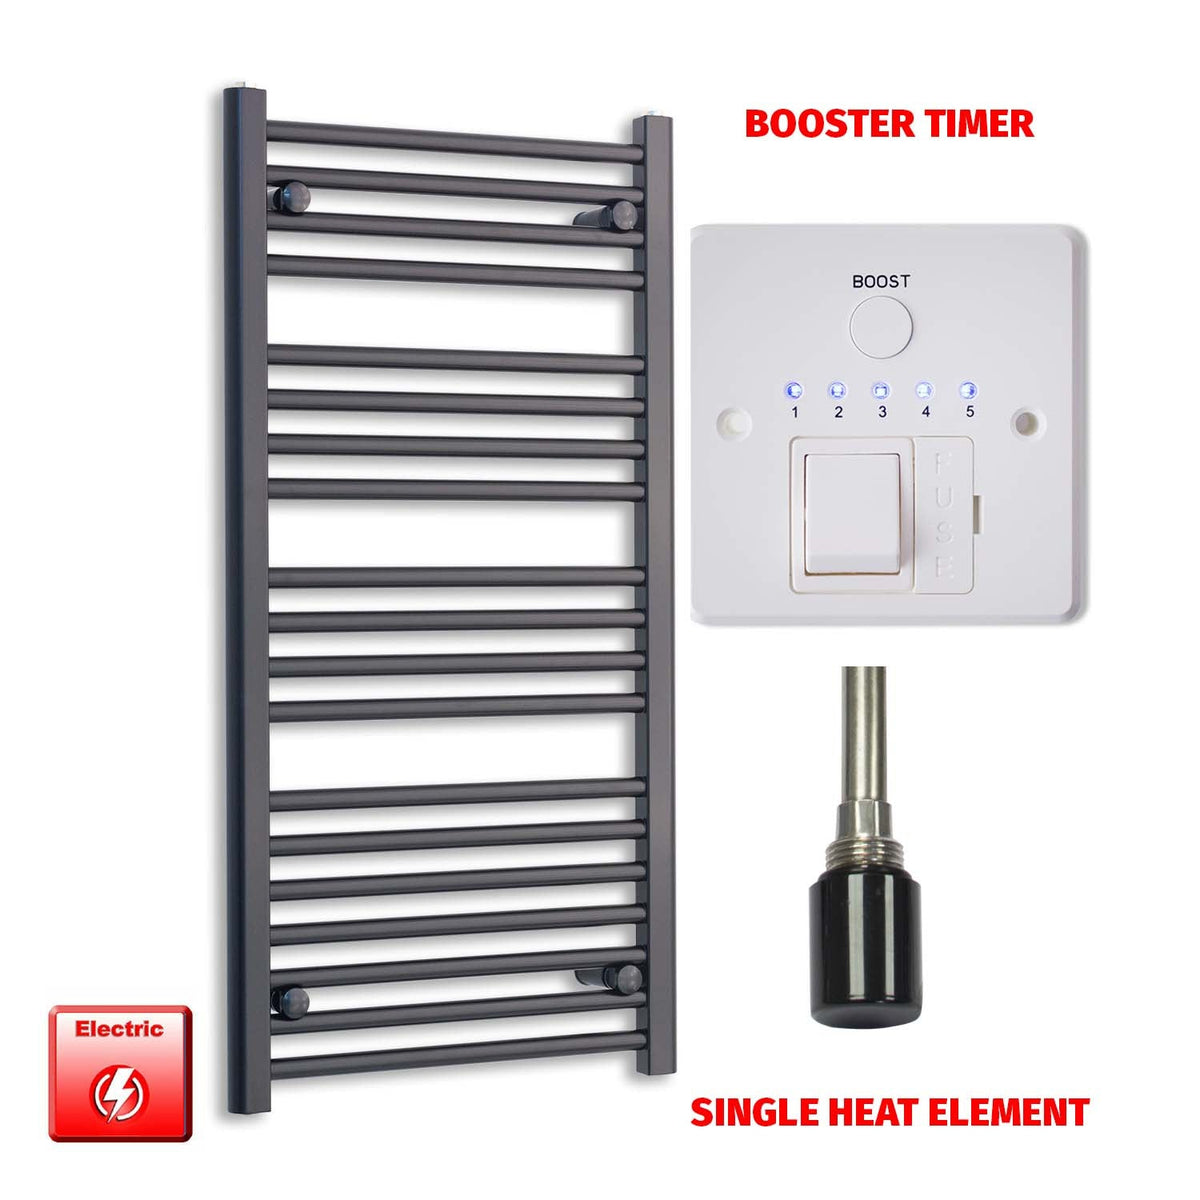 1000mm High 500mm Wide Flat Black Pre-Filled Electric Heated Towel Rail Radiator HTR Booster Timer